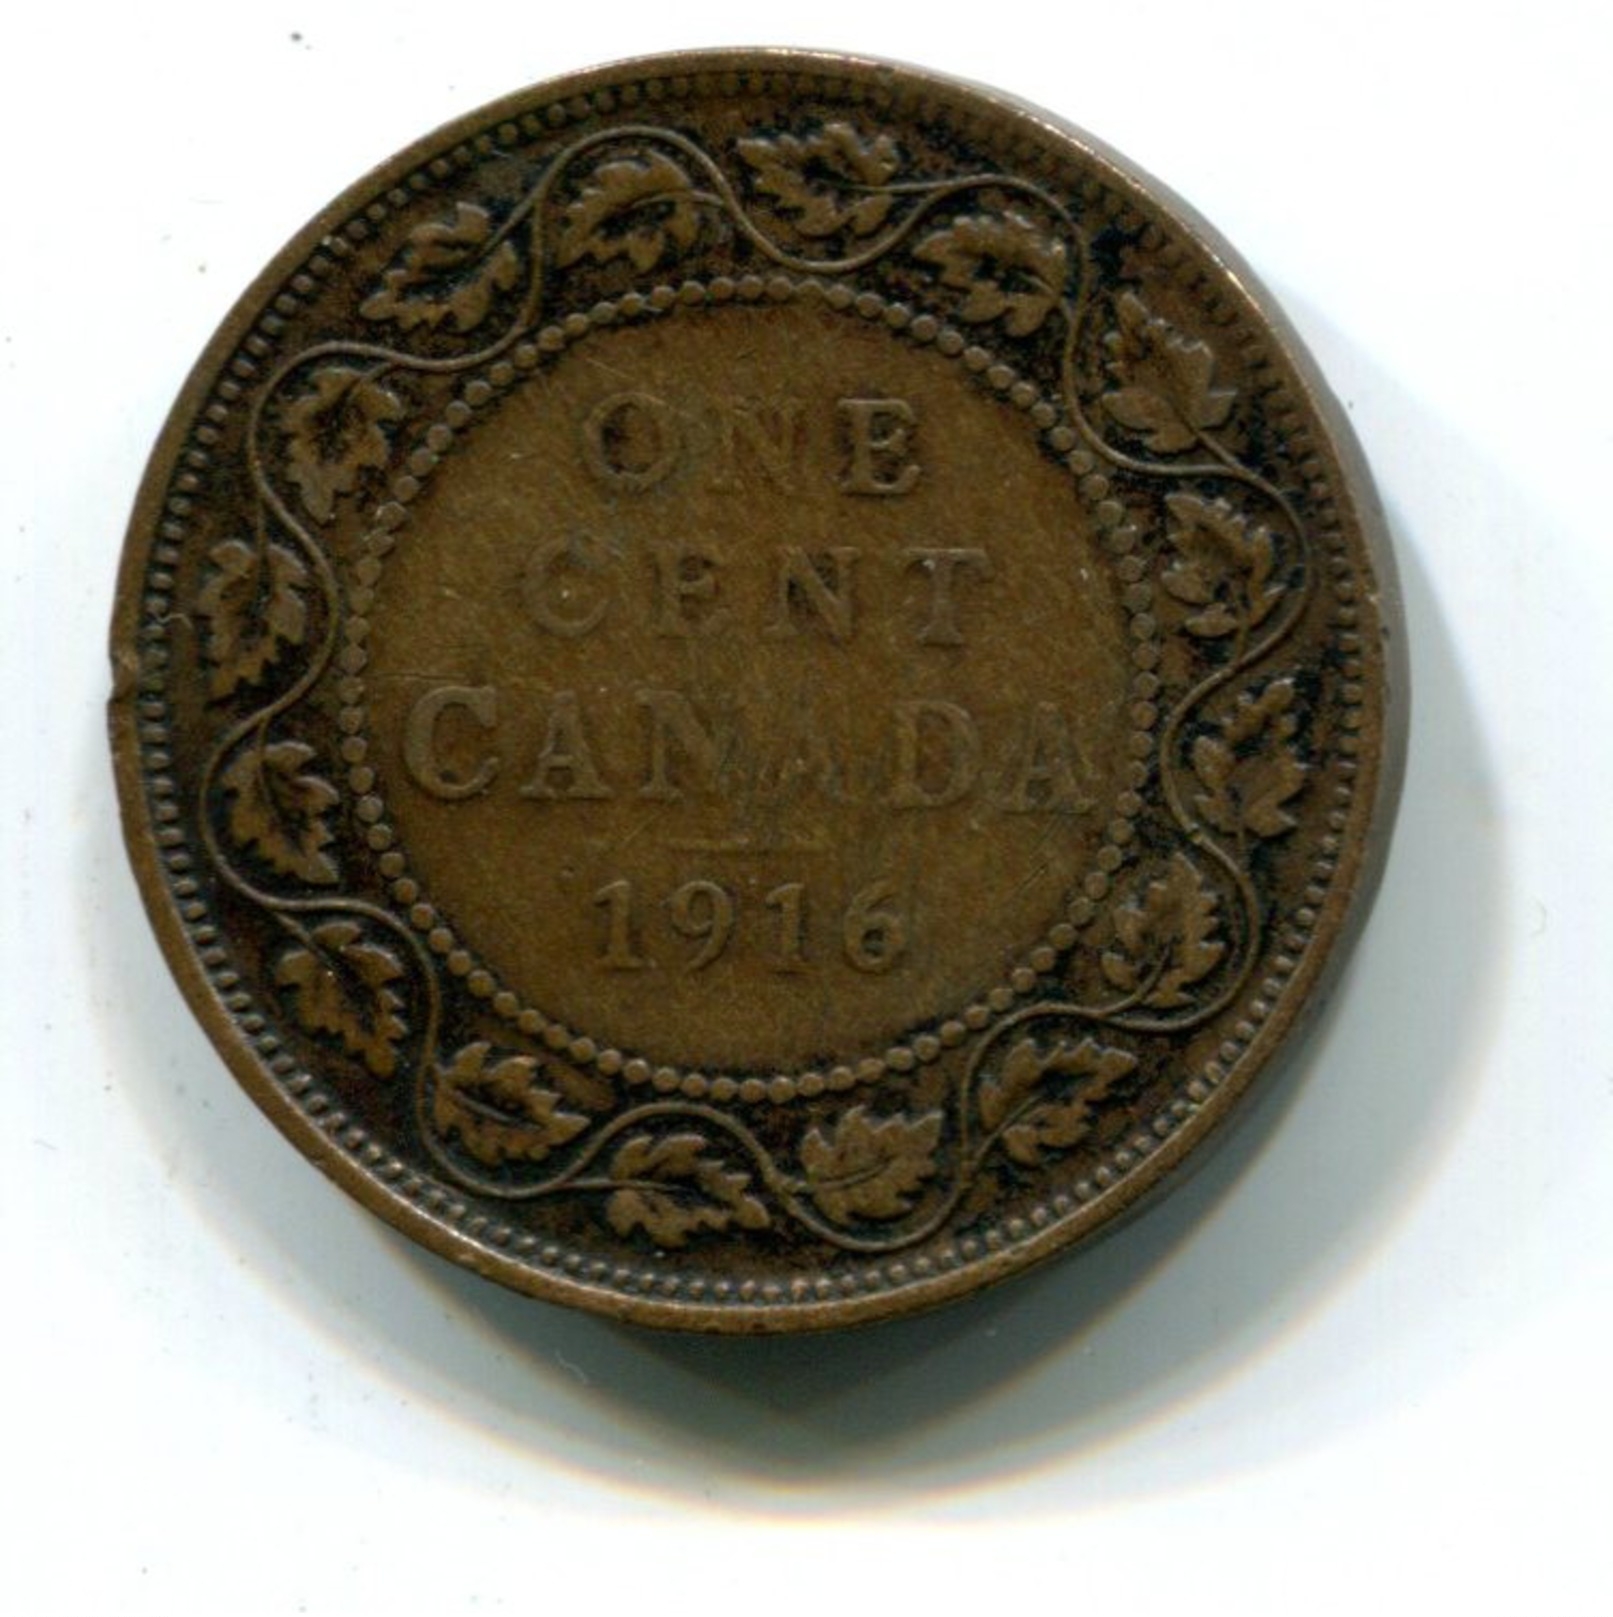 1916 Canada One Cent Coin - Canada